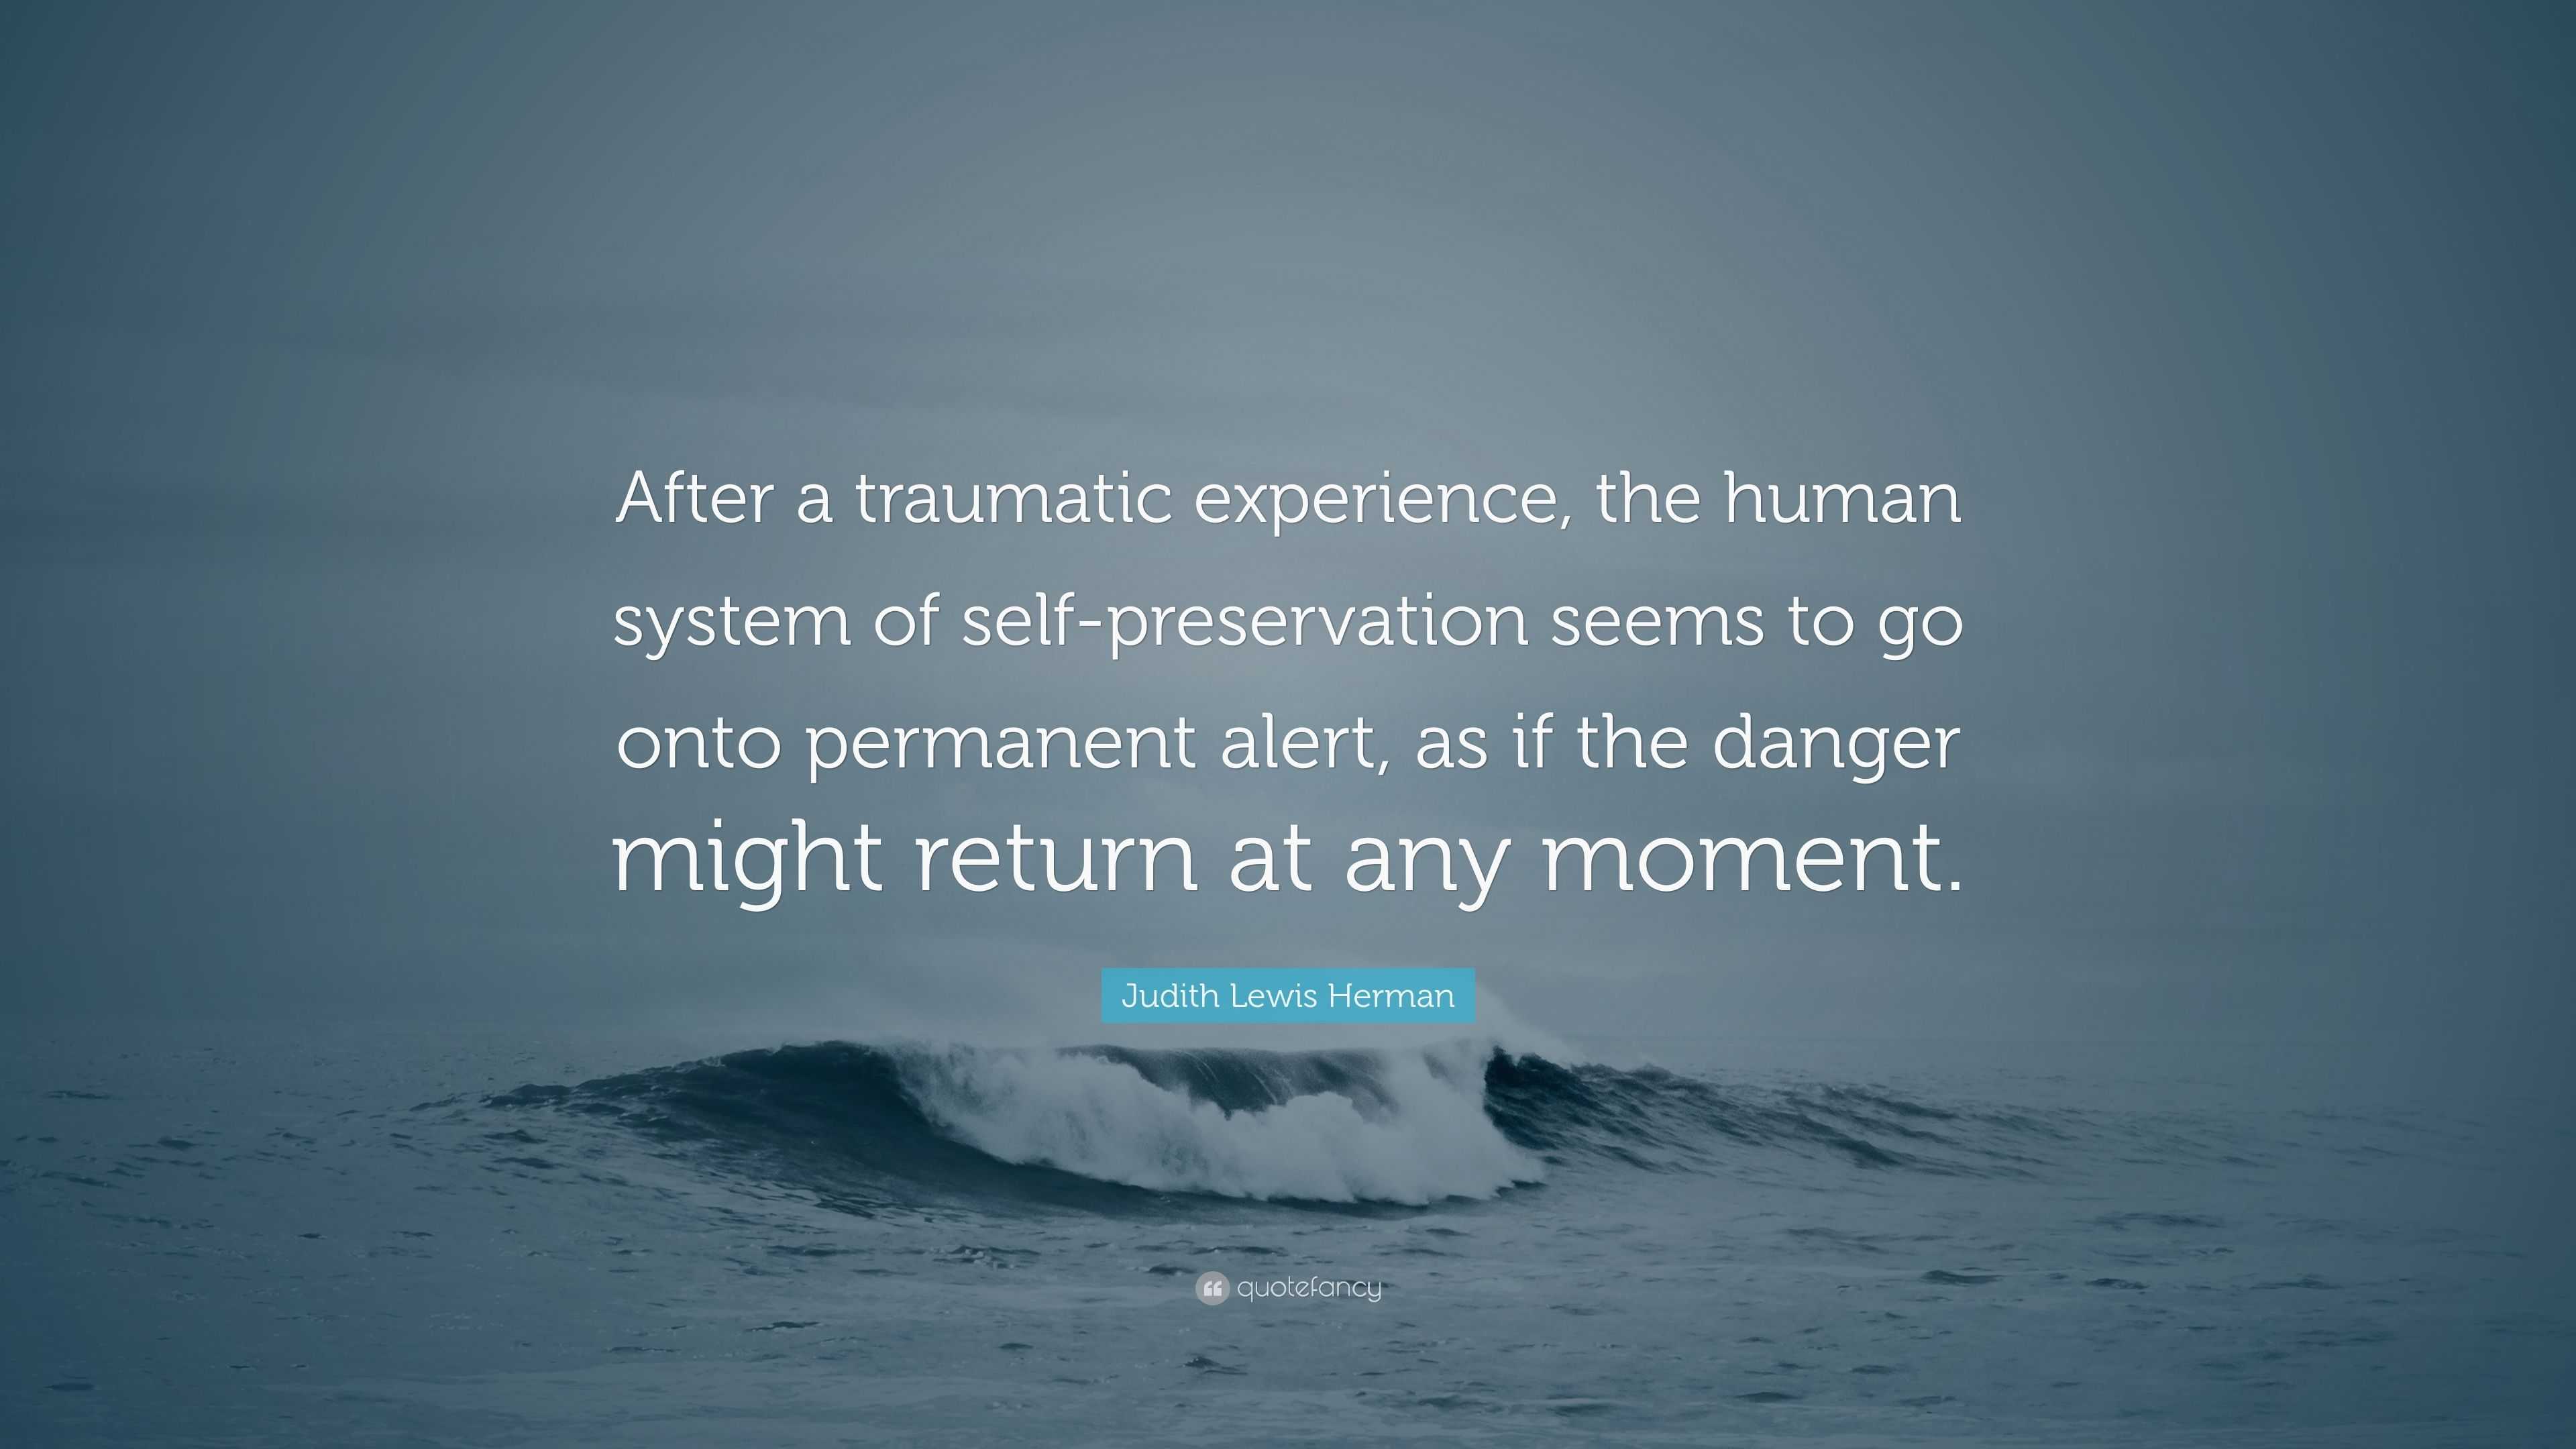 Judith Lewis Herman Quote: “After a traumatic experience, the human